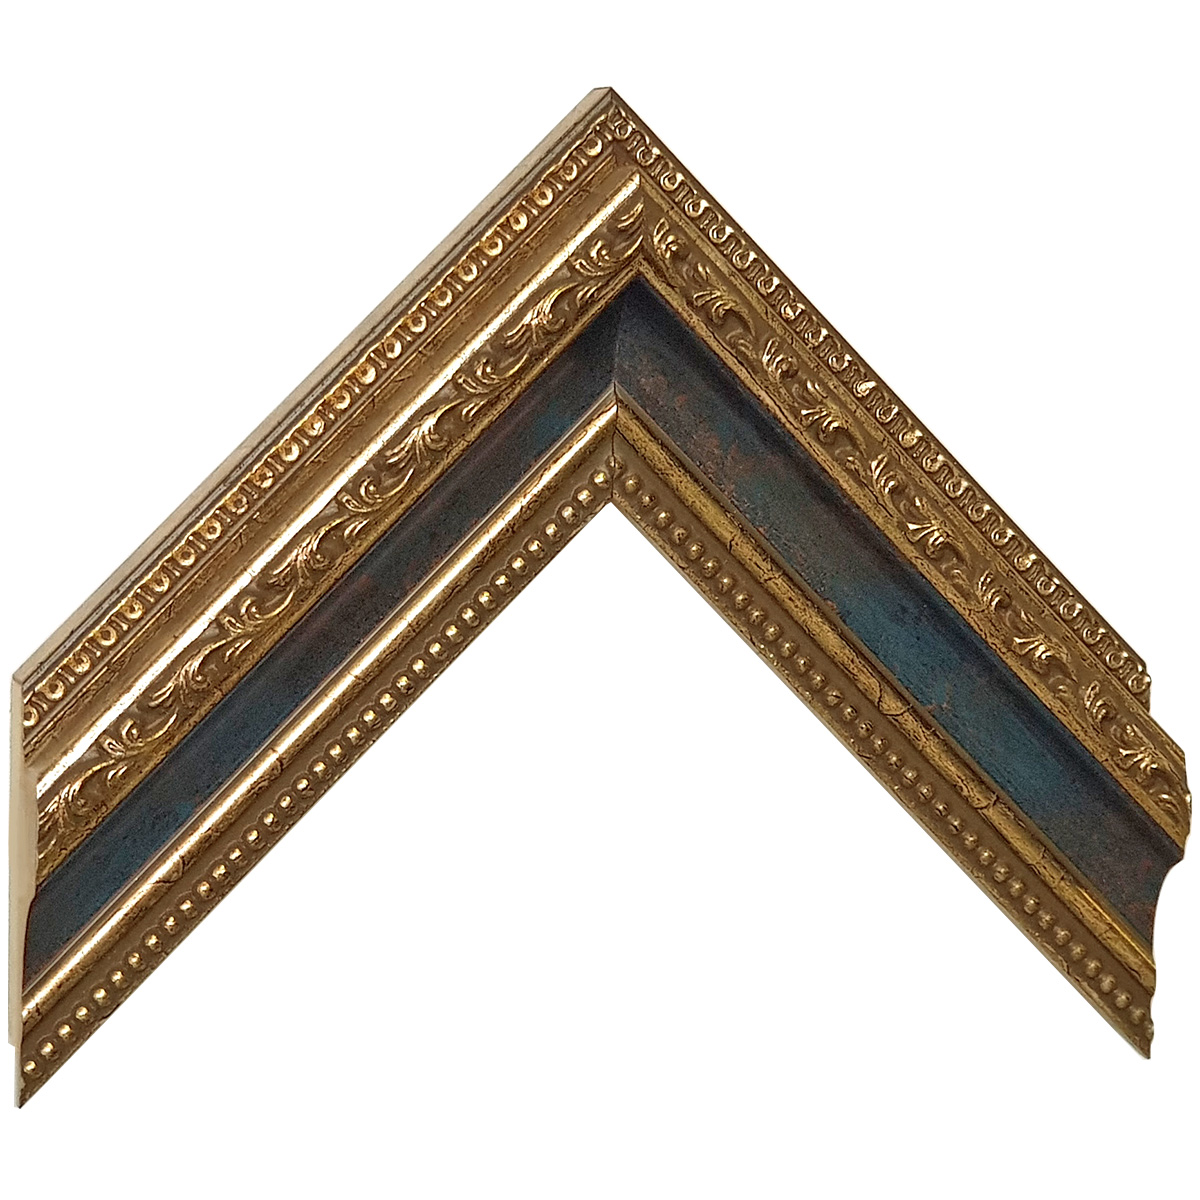 Moulding finger-jointed pine - width 53mm height 35 - gold, blue band - Sample